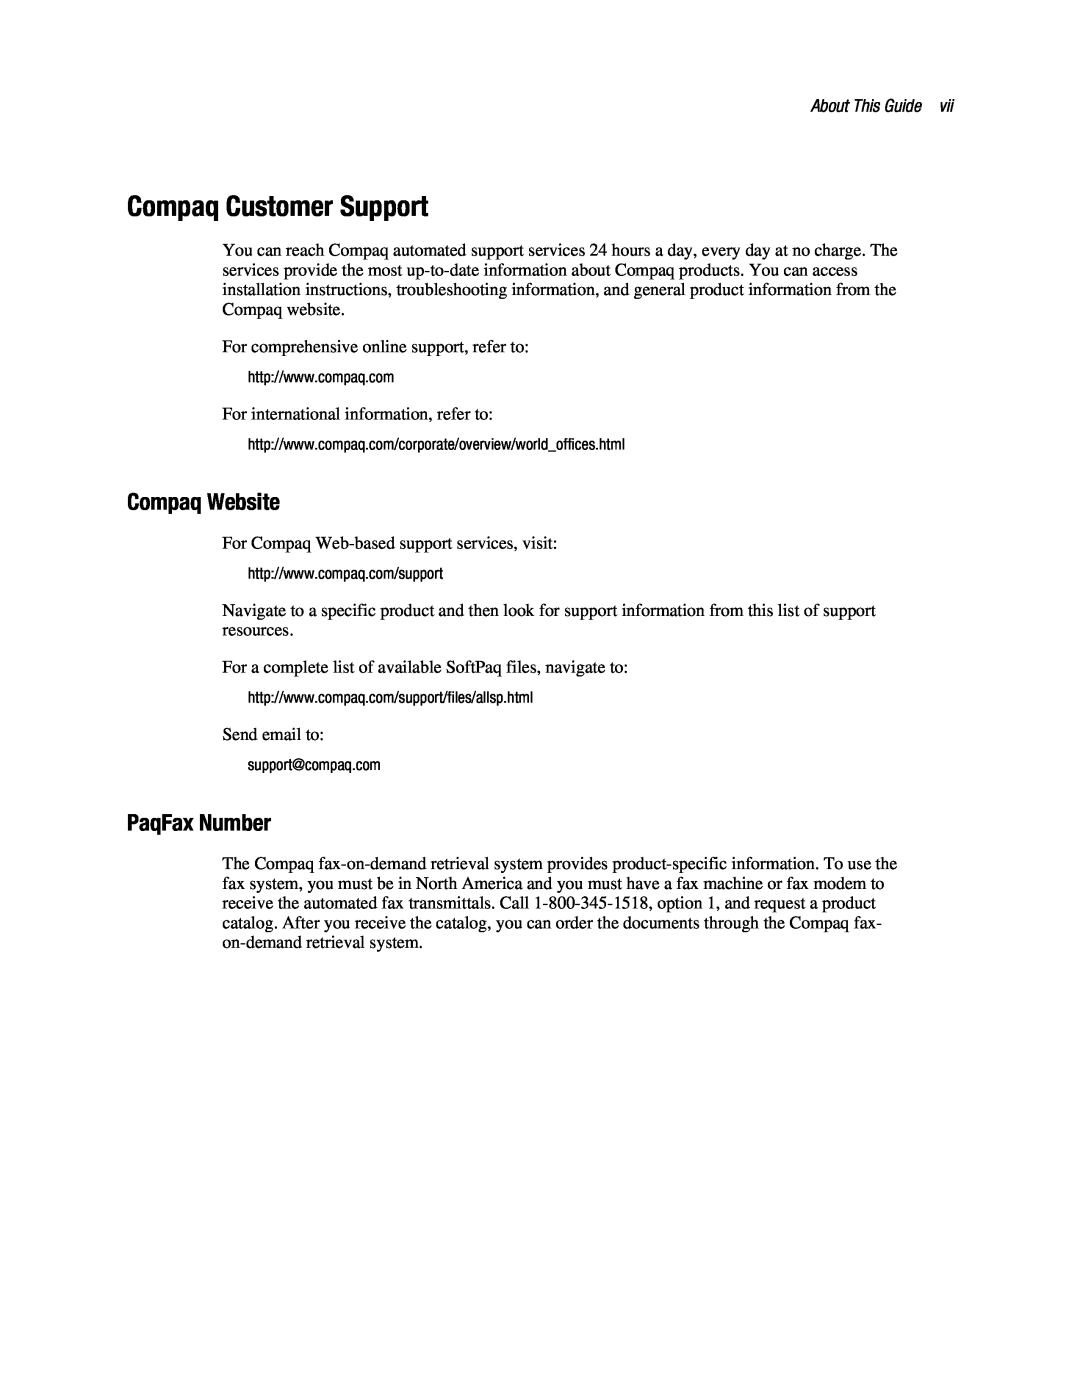 Compaq 3134 manual Compaq Customer Support, Compaq Website, PaqFax Number, About This Guide 